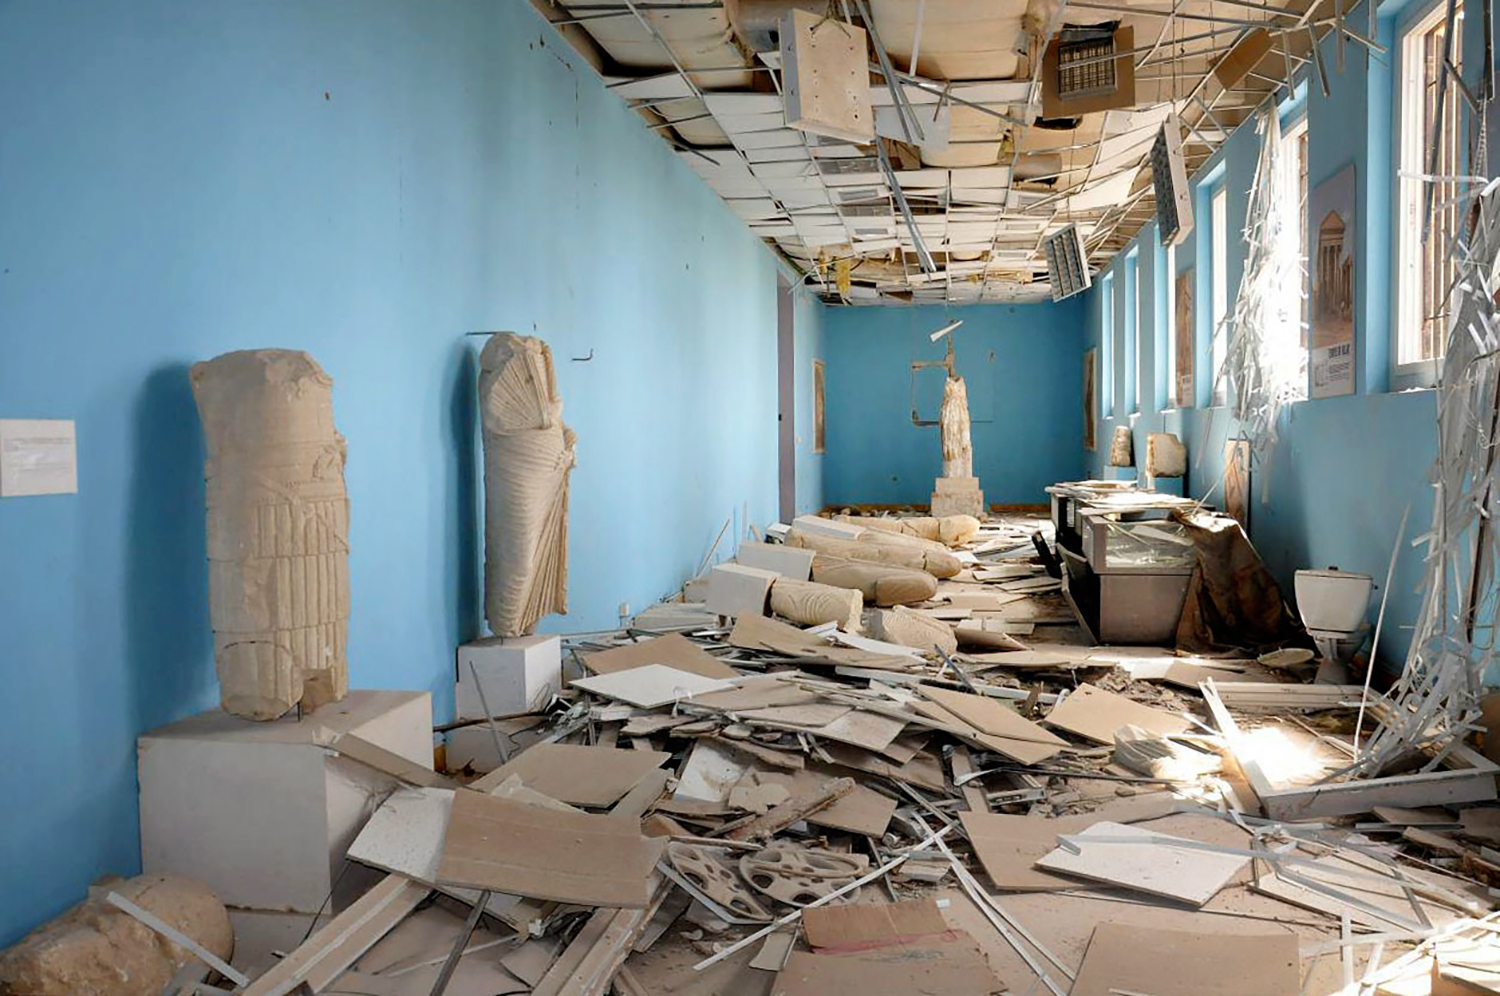 FILE - This file photo released March 27, 2016, by the Syrian official news agency SANA, shows destroyed statues at the damaged Palmyra Museum, in the city of Palmyra, central Syria. Palmyra, the archaeological gem that Islamic State fighters retook Sunday, Dec. 11, 2016, from Syrian troops, is a desert oasis surrounded by palm trees, and a UNESCO world heritage site, that boasts 2,000-year-old towering Roman-era colonnades and priceless artifacts. It is also a strategic crossroads linking the Syrian capital, Damascus, with the country's east and neighboring Iraq. (SANA via AP, file)